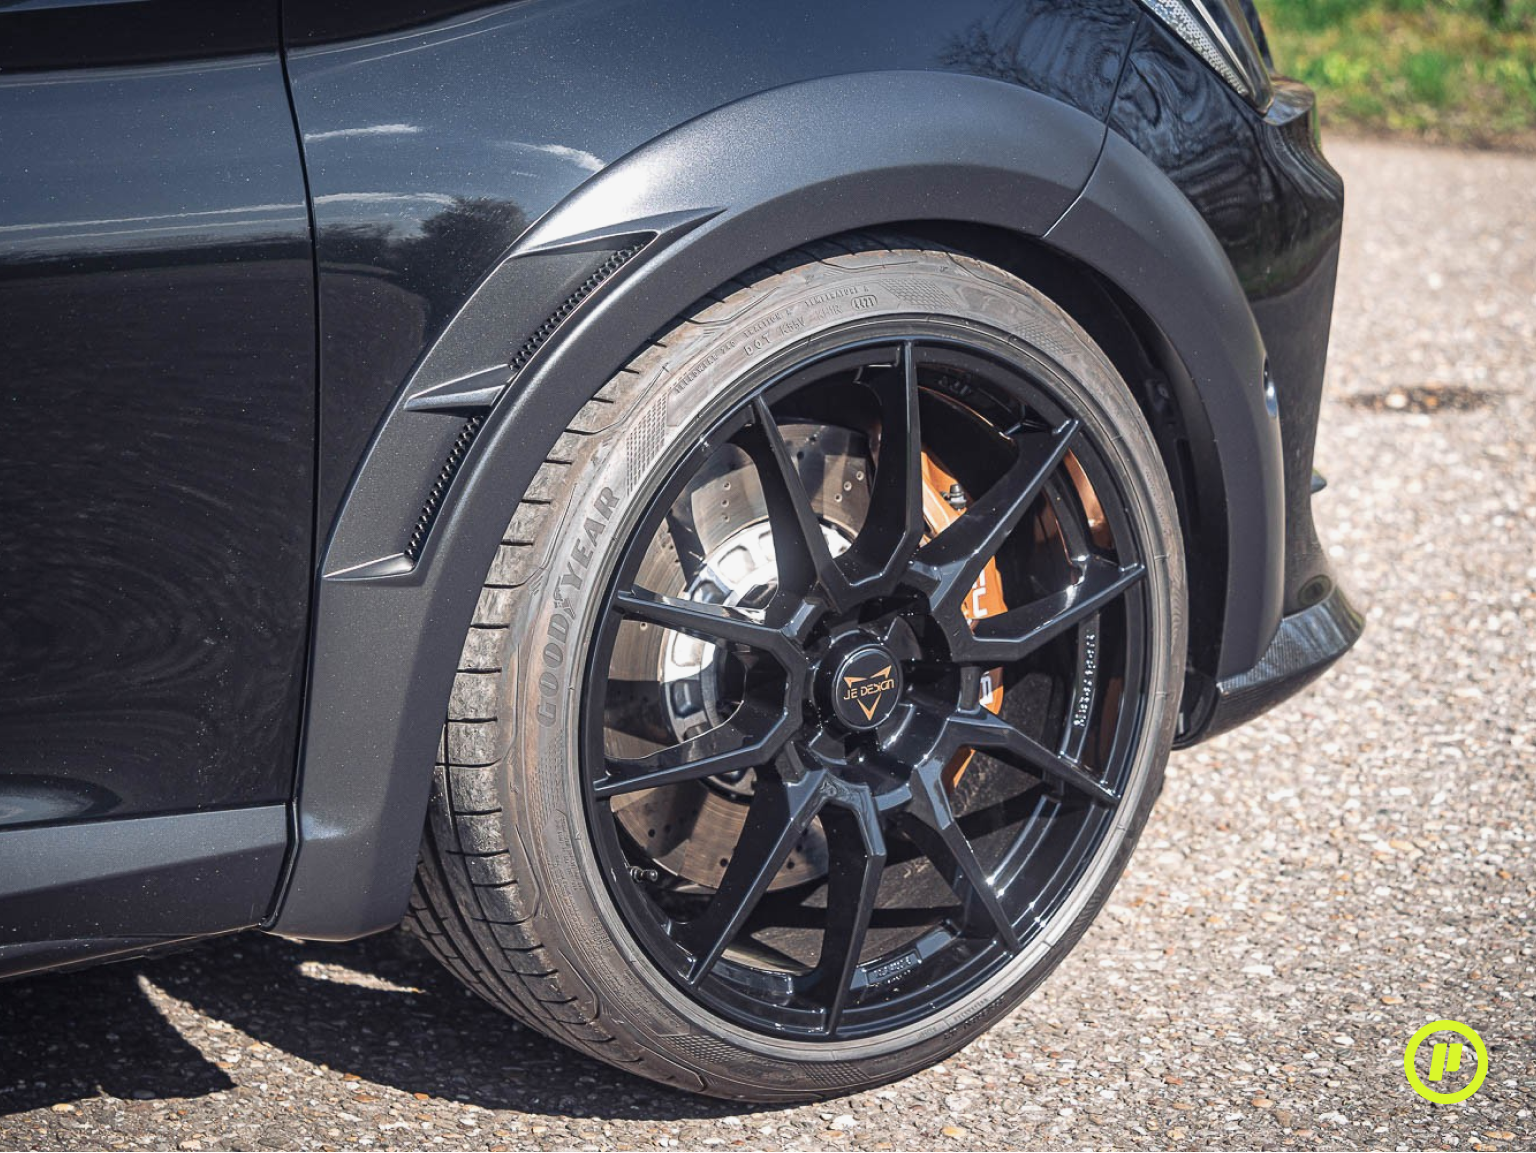 JE Design - Wheel Arches Widebody Extensions for Cupra Formentor (KM Only for VZ5 Model 2020+)